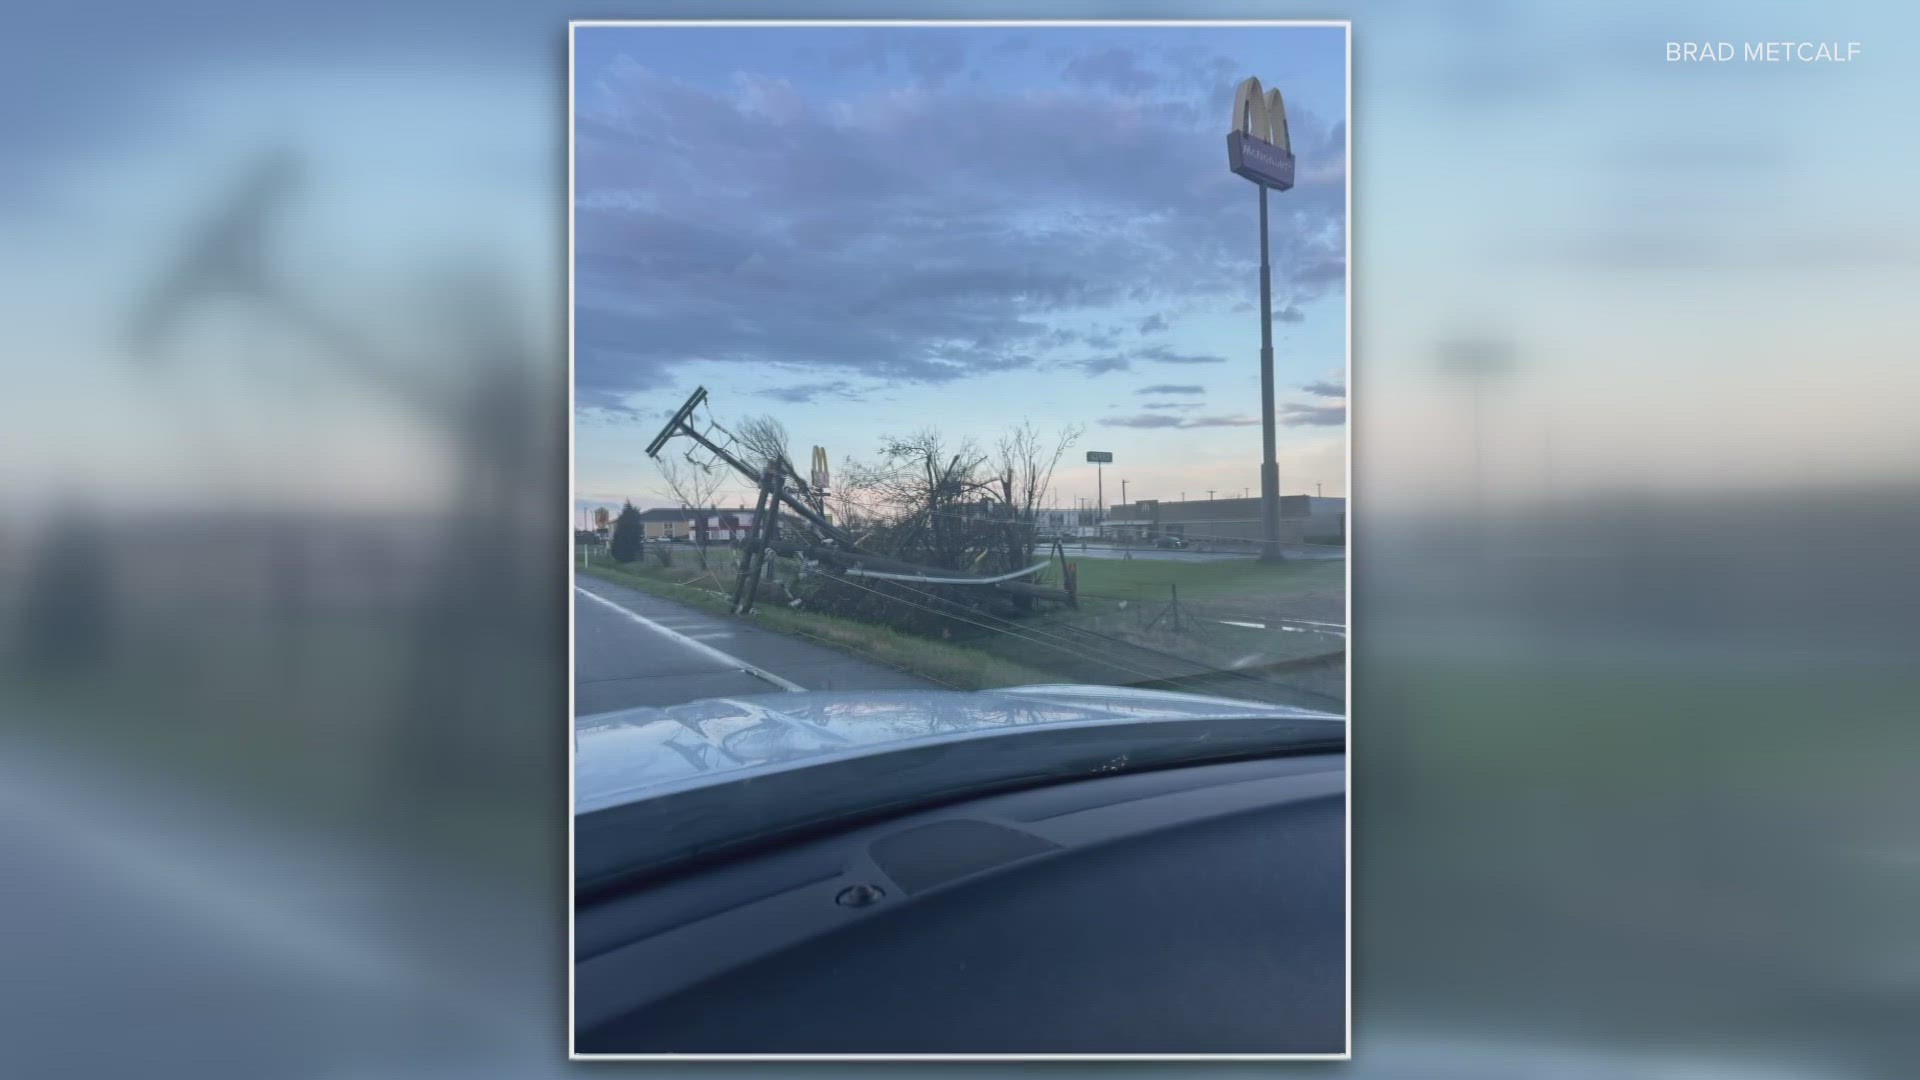 Nelson County Emergency Management shared photos after storms rolled through Tuesday morning.